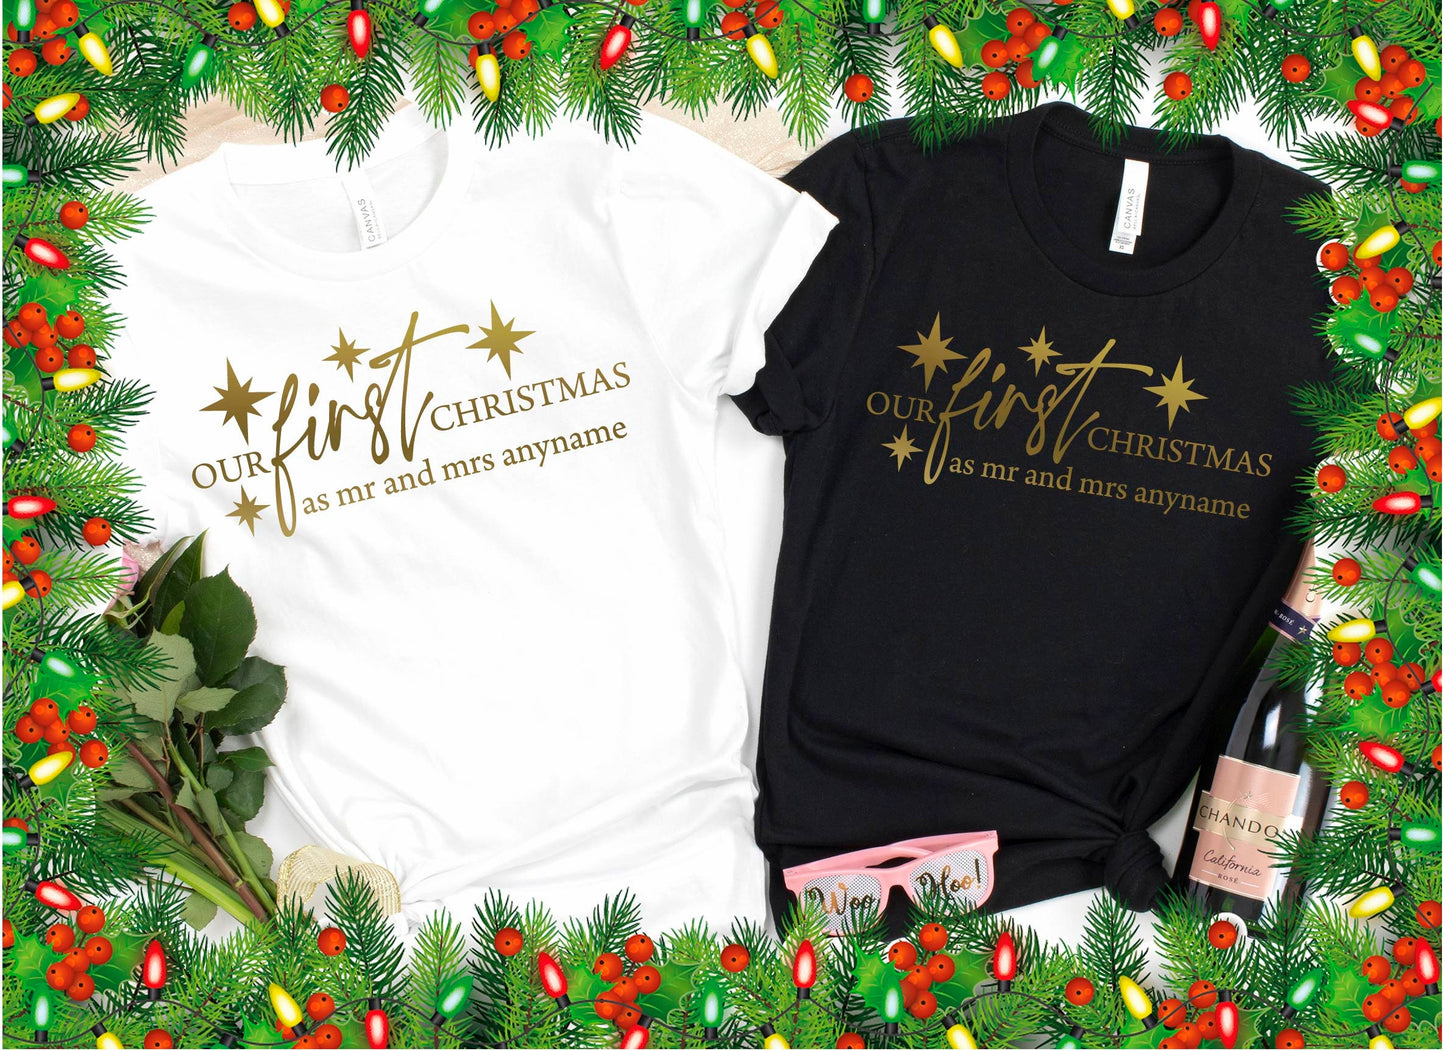 Gold Print Personalised Our First Christmas as Mr & Mrs T-Shirt - Christmas Wedding tshirt for couples | Married Newlyweds Name